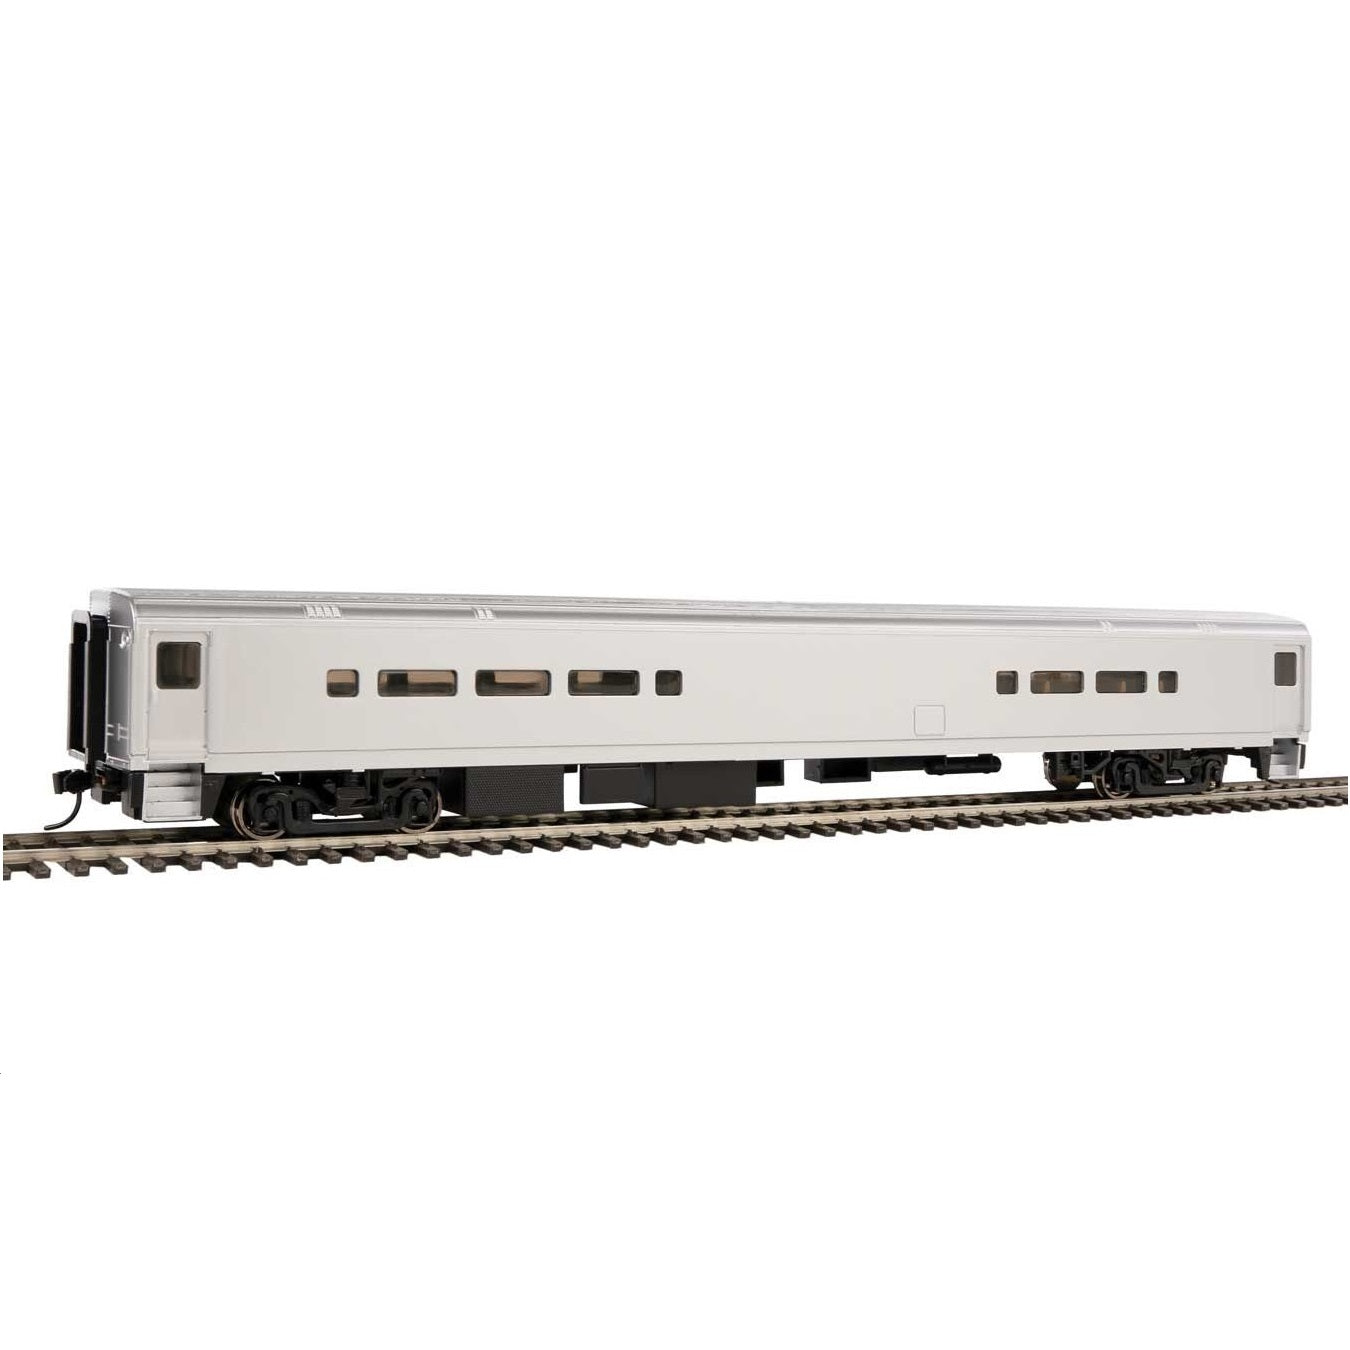 WalthersMainline® 85' Horizon Cafe/Club Food Service Car - Painted Unlettered, HO Scale - Micro - Mark Model Trains, Rolling Stock, Z